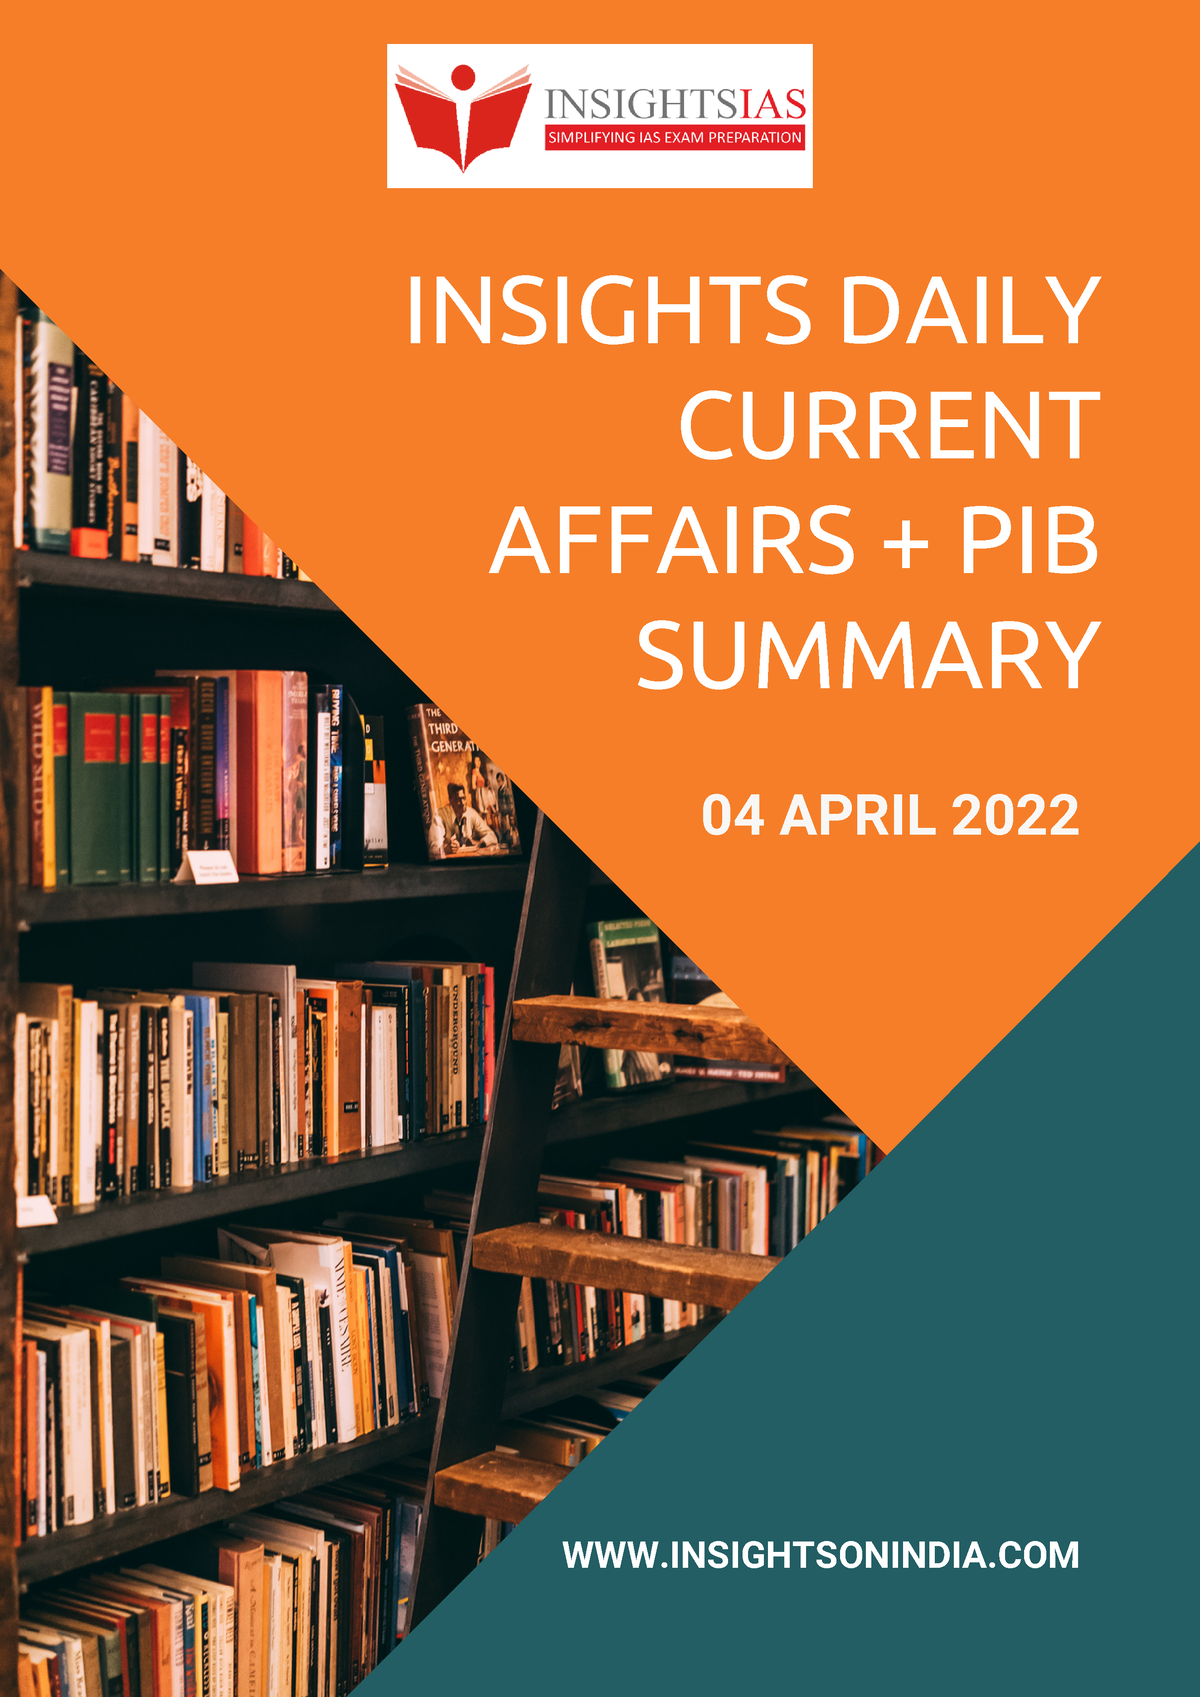 04 April 2022 Insights Daily Current Affairs Pib Summary 1 Insights Daily Current Affairs 9609